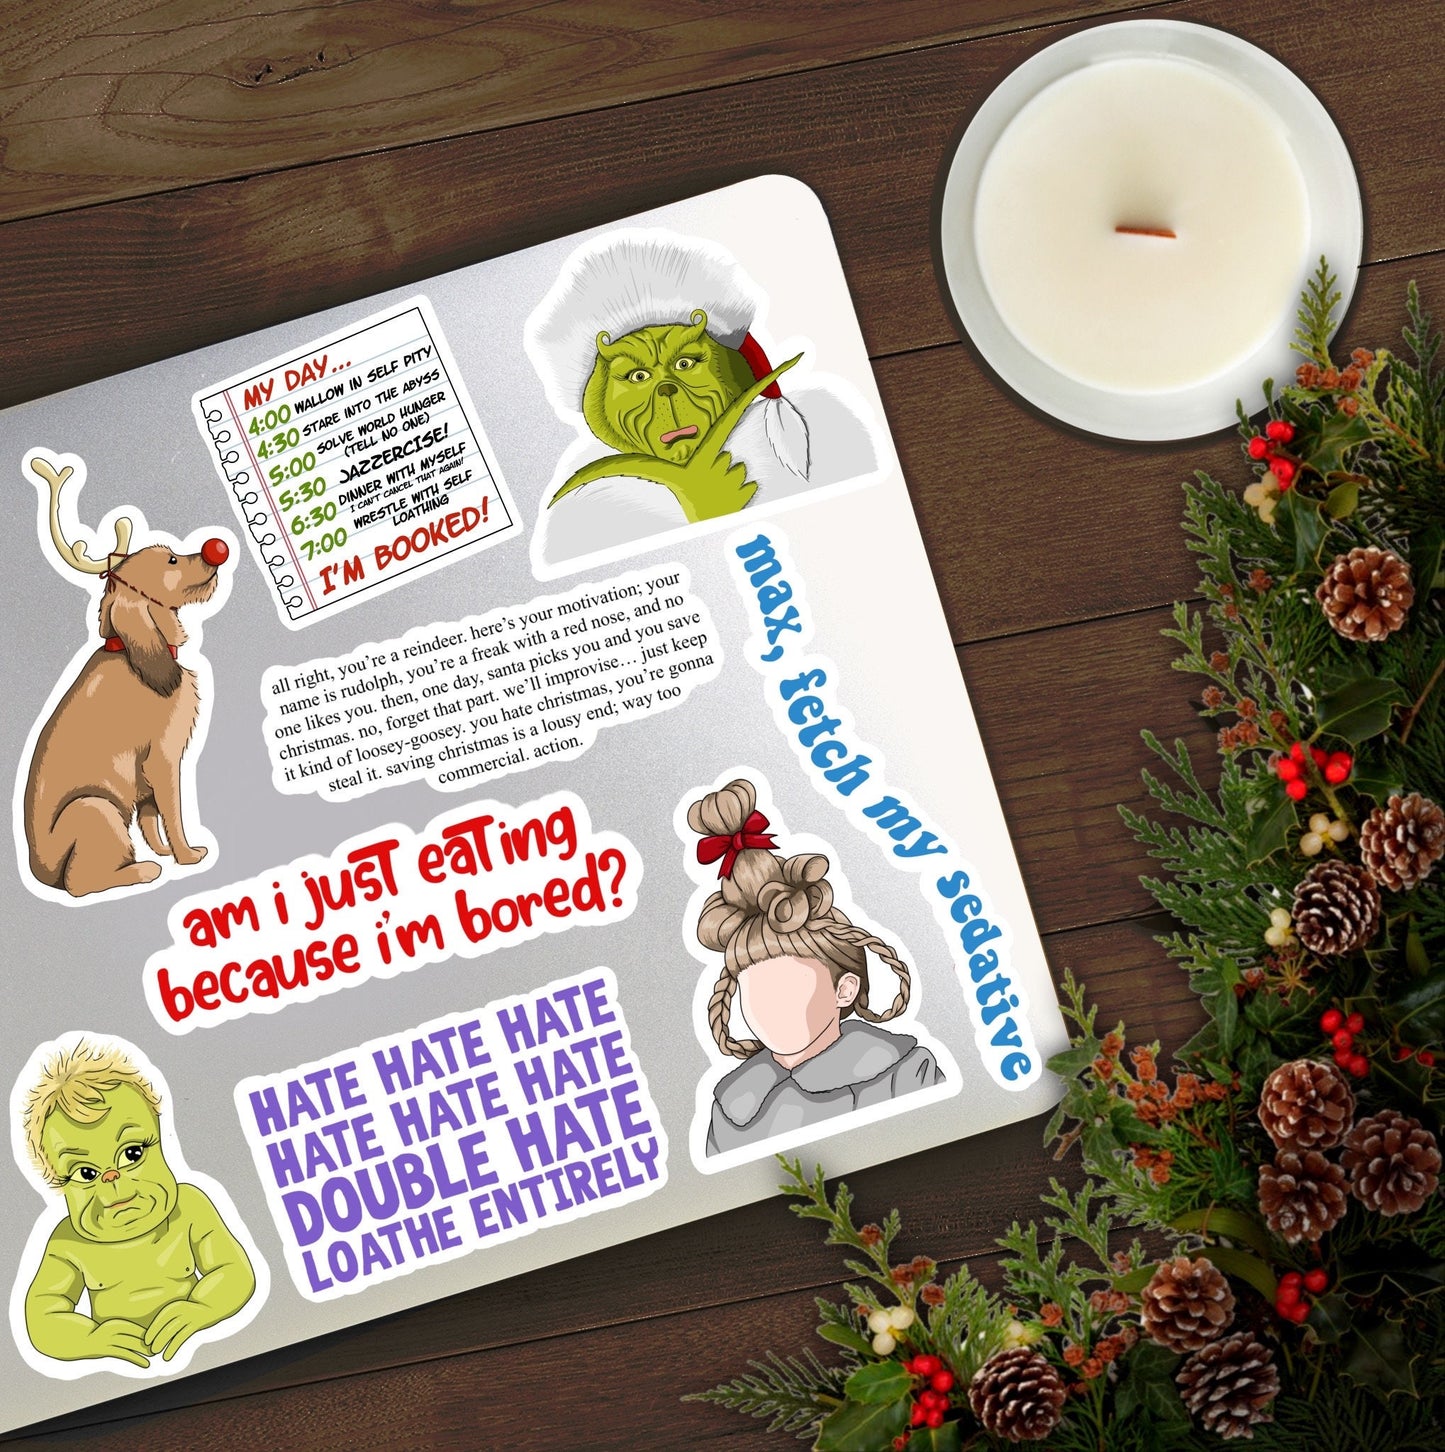 Baby Grinch | The Grinch Sticker | Christmas Movie Stickers